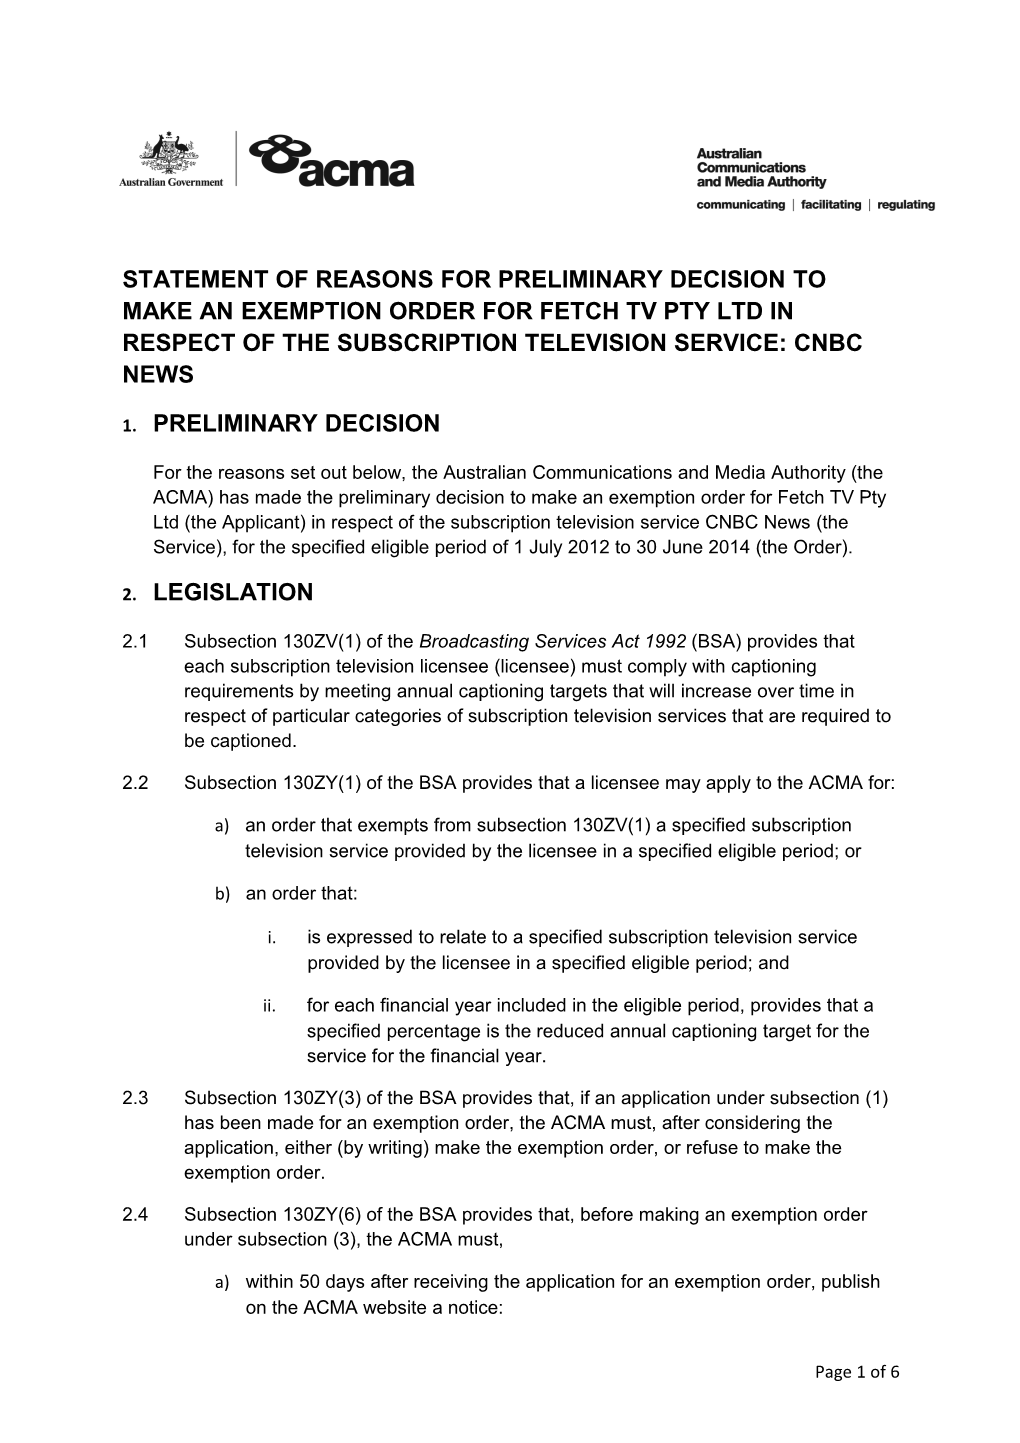 Statement of Reasons for Preliminary Decision Fetch TV Cons 37